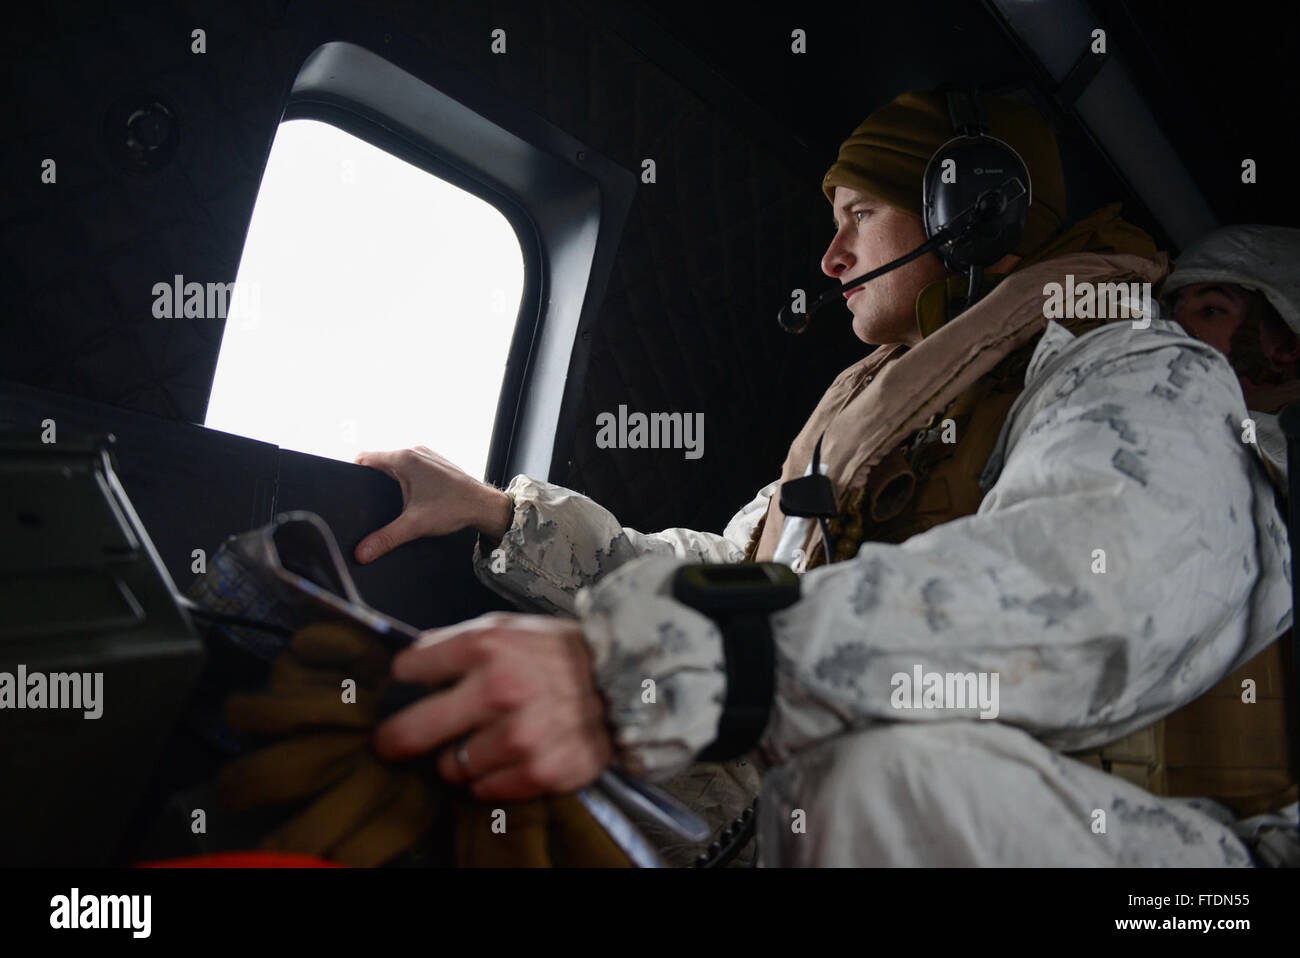 160307-N-QJ850-478 NORTH SEA (March 7, 2016) Lt. Col. David W. Baas, commander of troops of the 2nd Assault Amphibian Battalion, looks out the window of a Netherlands NH90 helicopter during Exercise Cold Response 2016 (CDR 16). CDR 16 involves maritime, land and air operation training and focuses on naval and amphibious operations transitioning to ground maneuver. The location in central Norway provides an extreme cold-weather environment for the 12 participating countries to collectively develop tactics, techniques and procedures and increase interoperability. (U.S. Navy photo by Mass Communi Stock Photo